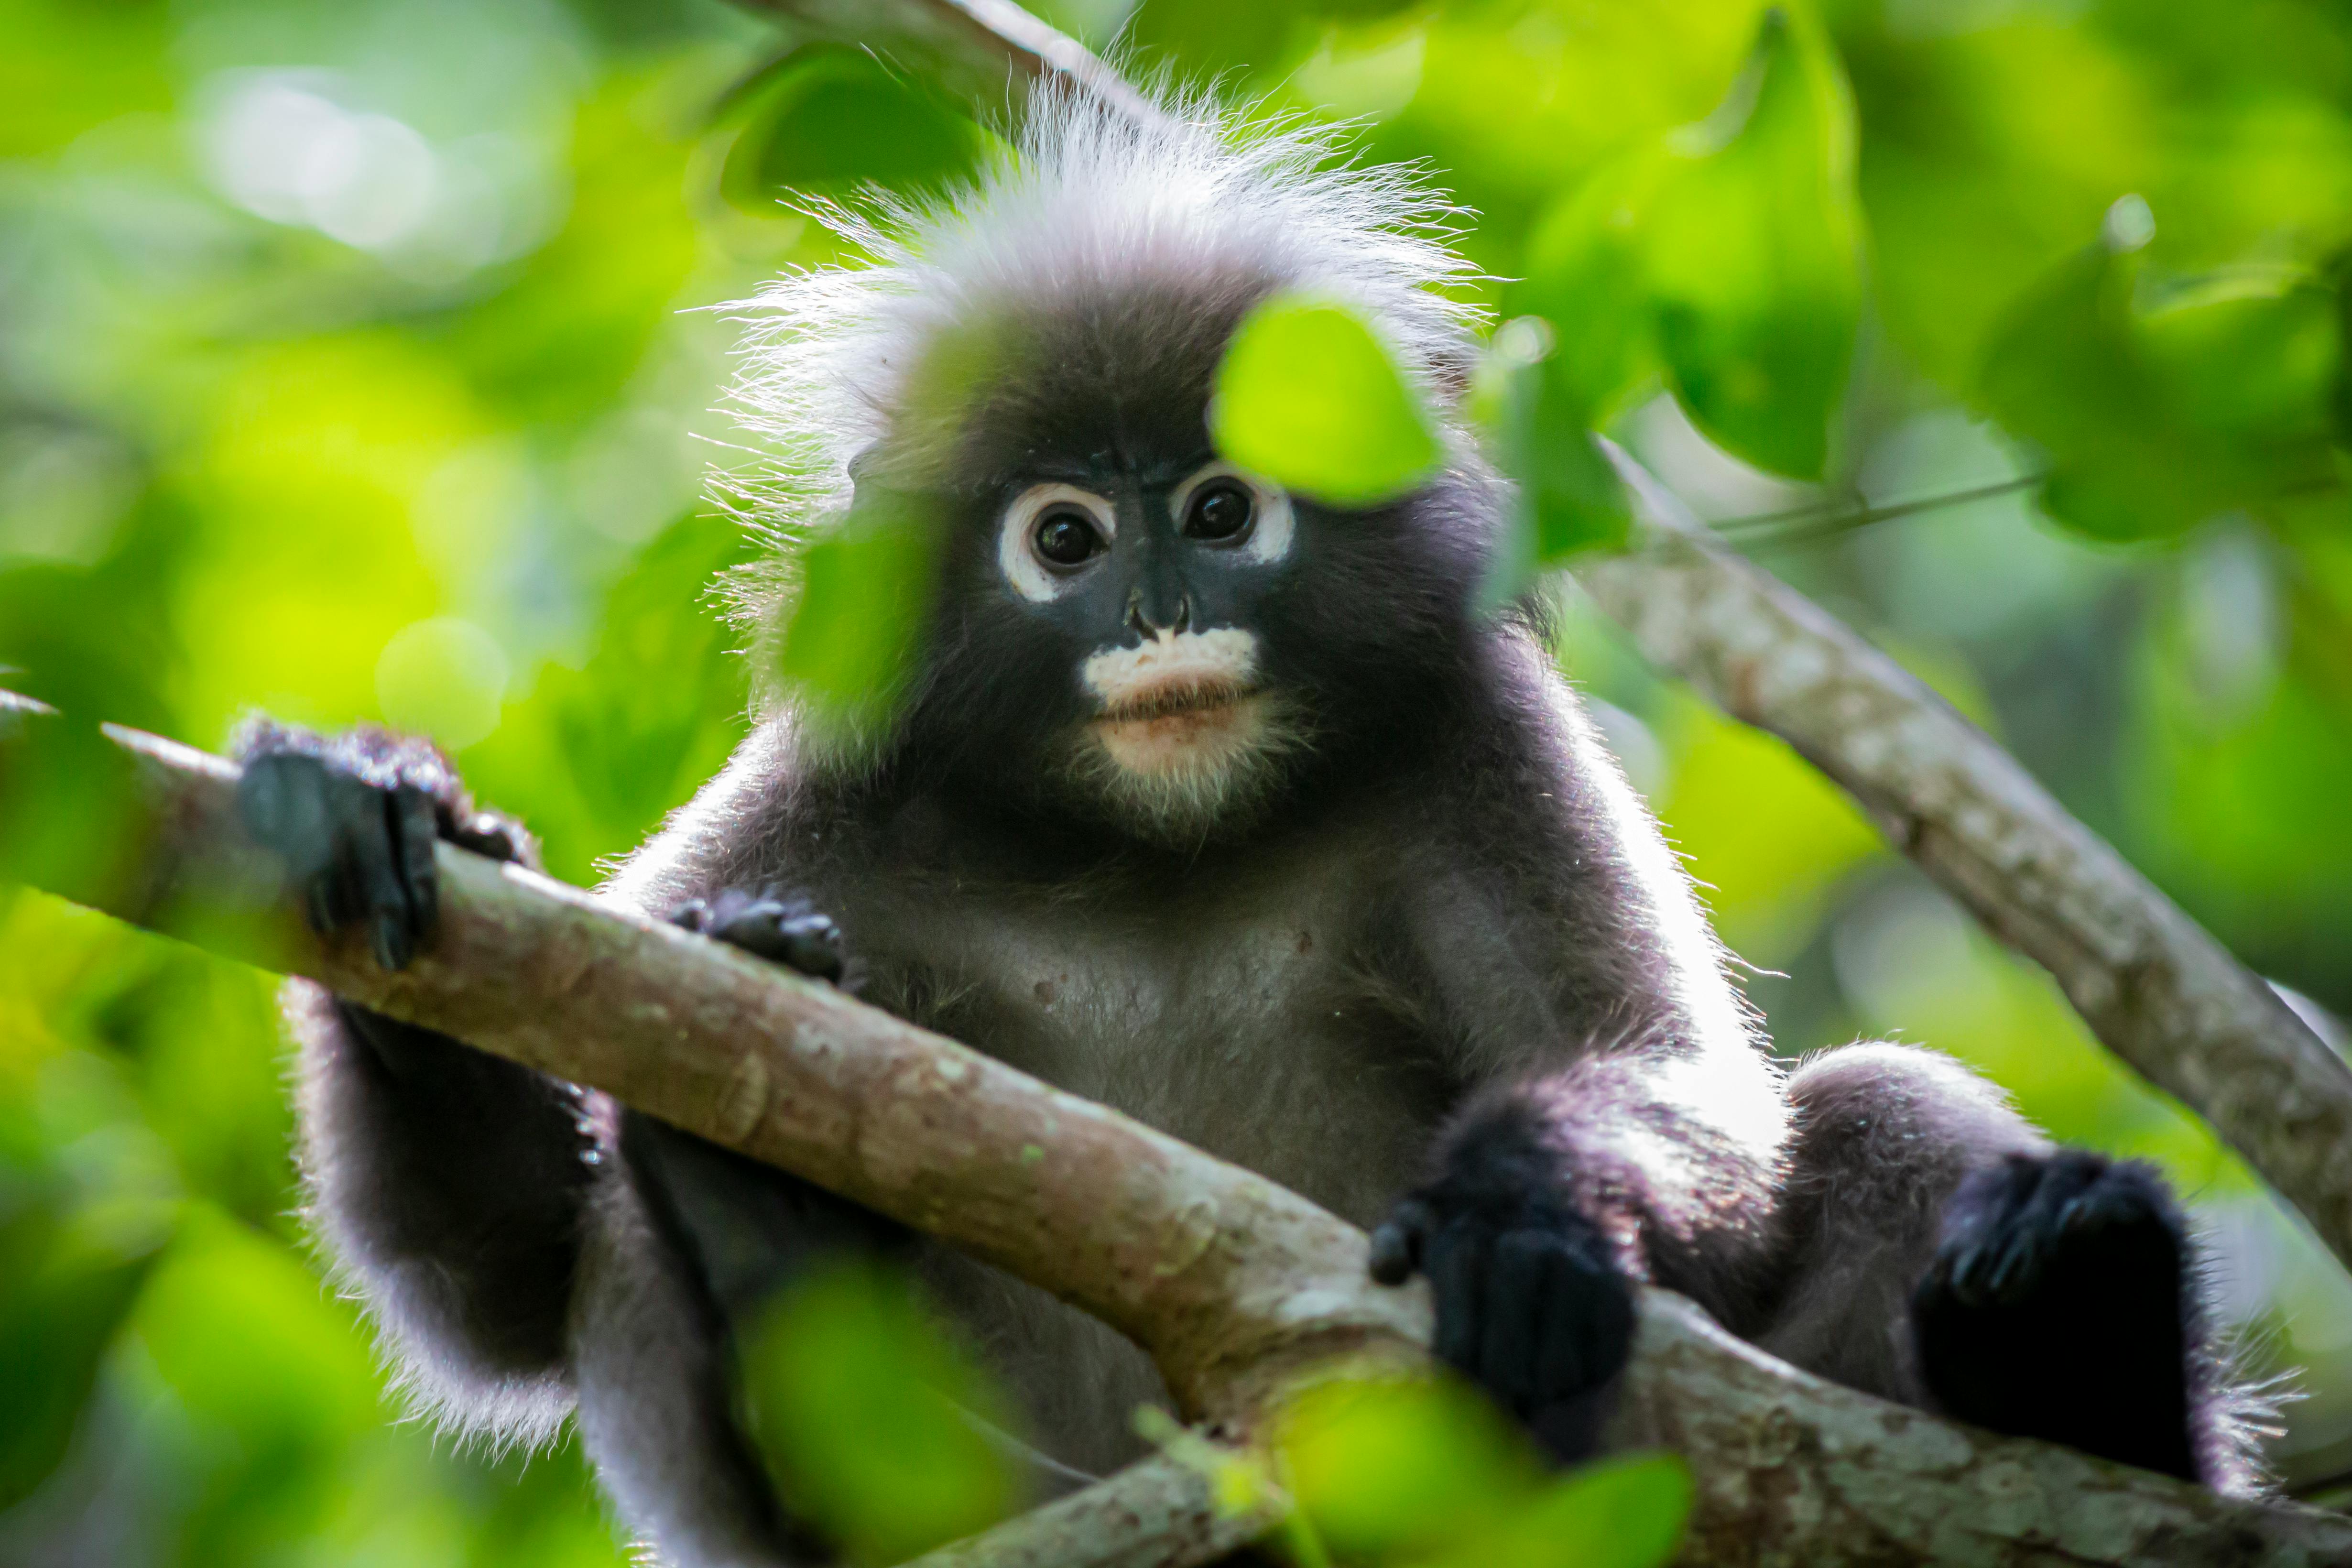 Dusky Leaf Monkey Sitting on a Tree Branch while Looking at the